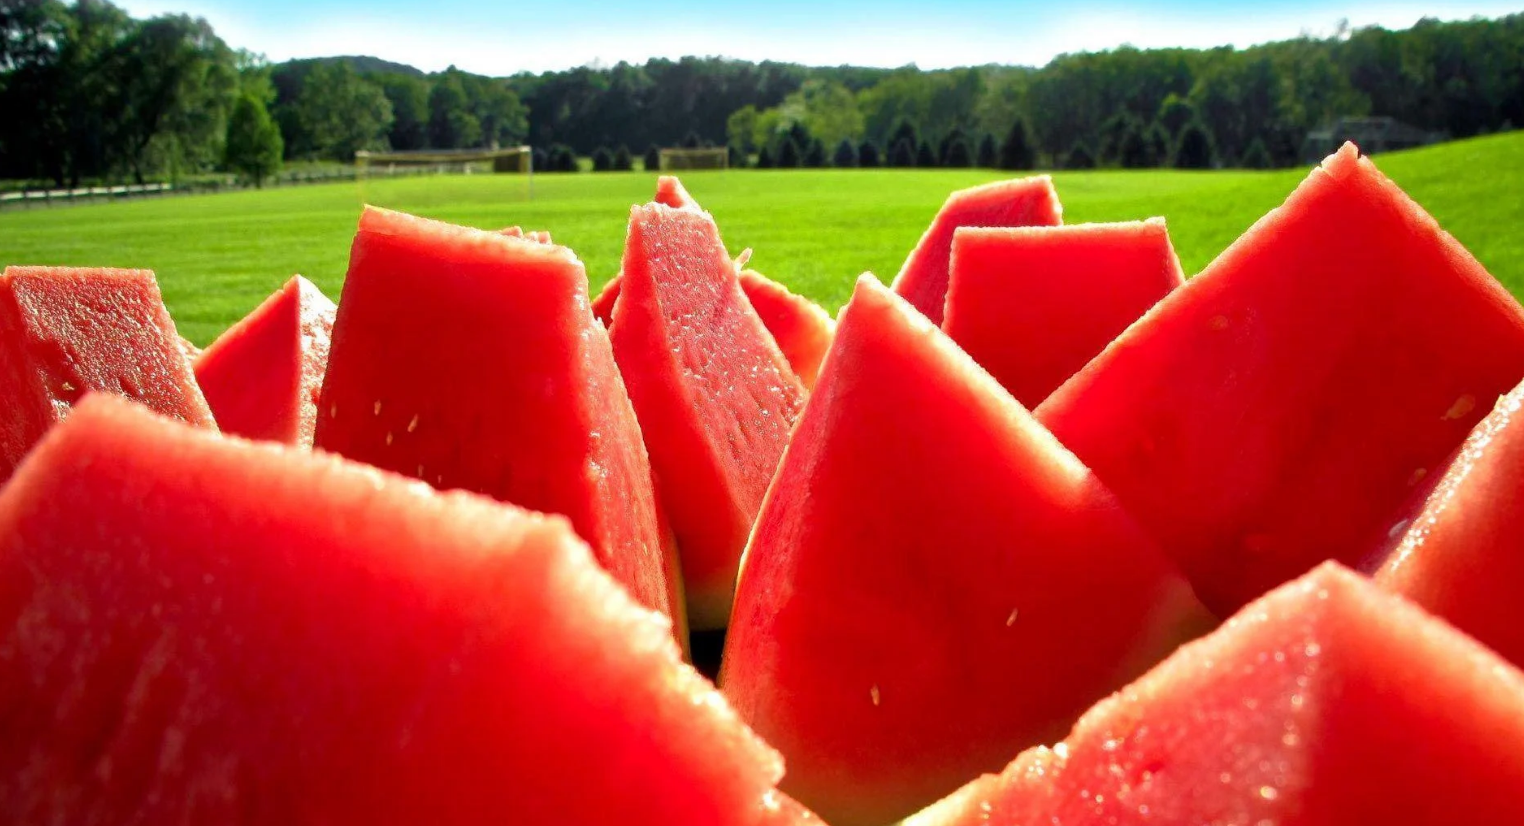 Water mellon helps to boost the body